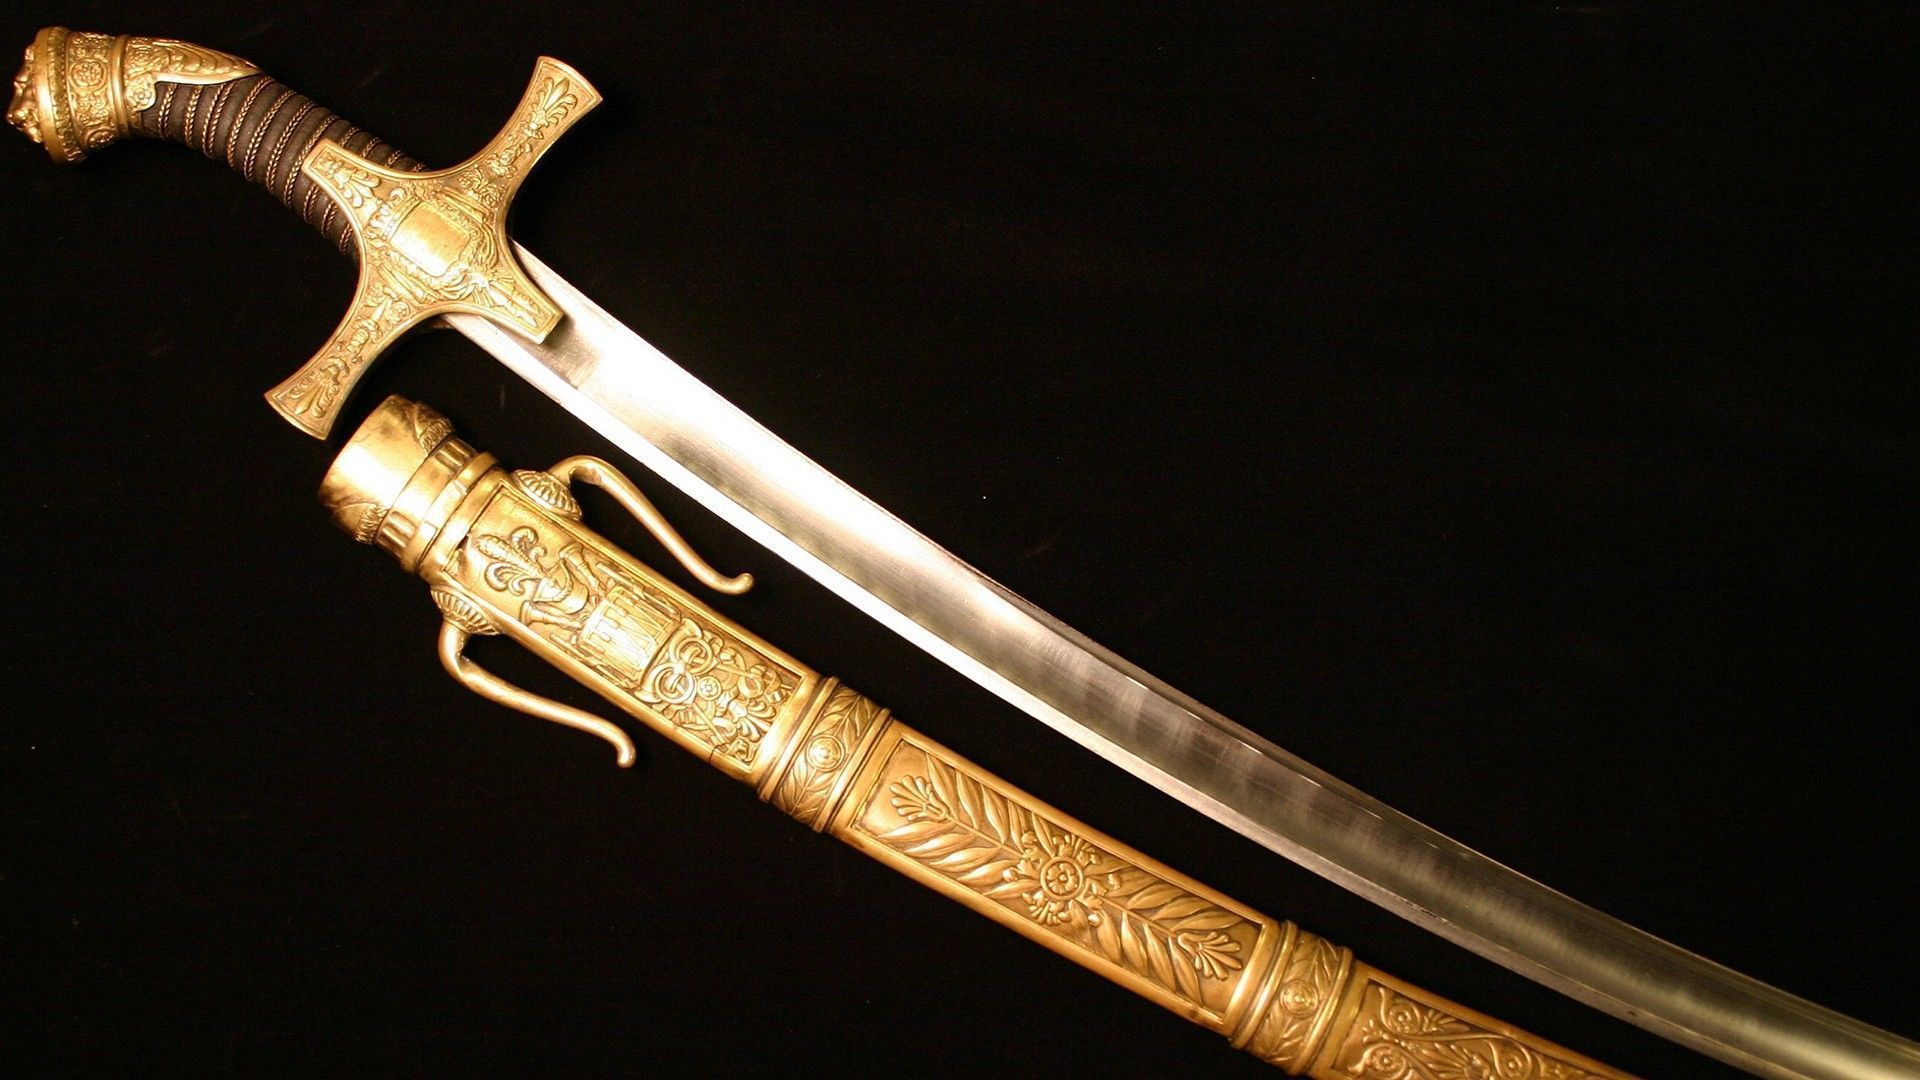 9 Sword HD Wallpapers | Backgrounds - Wallpaper Abyss